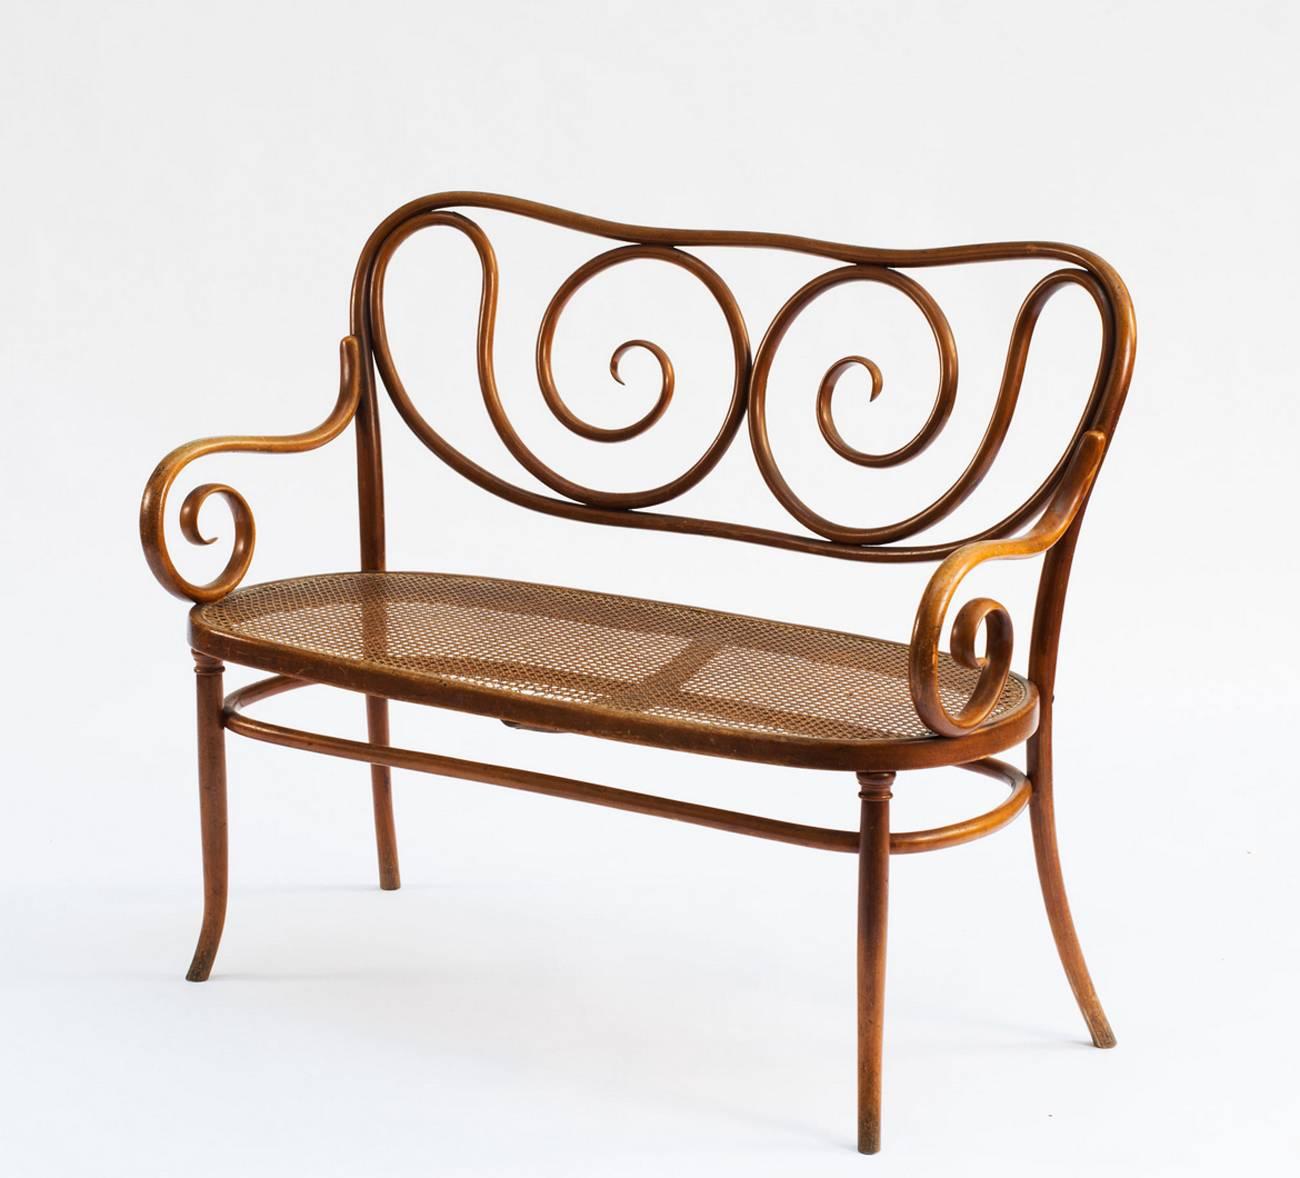 Vienna Secession Extremely Rare Bentwood Settee by August Thonet